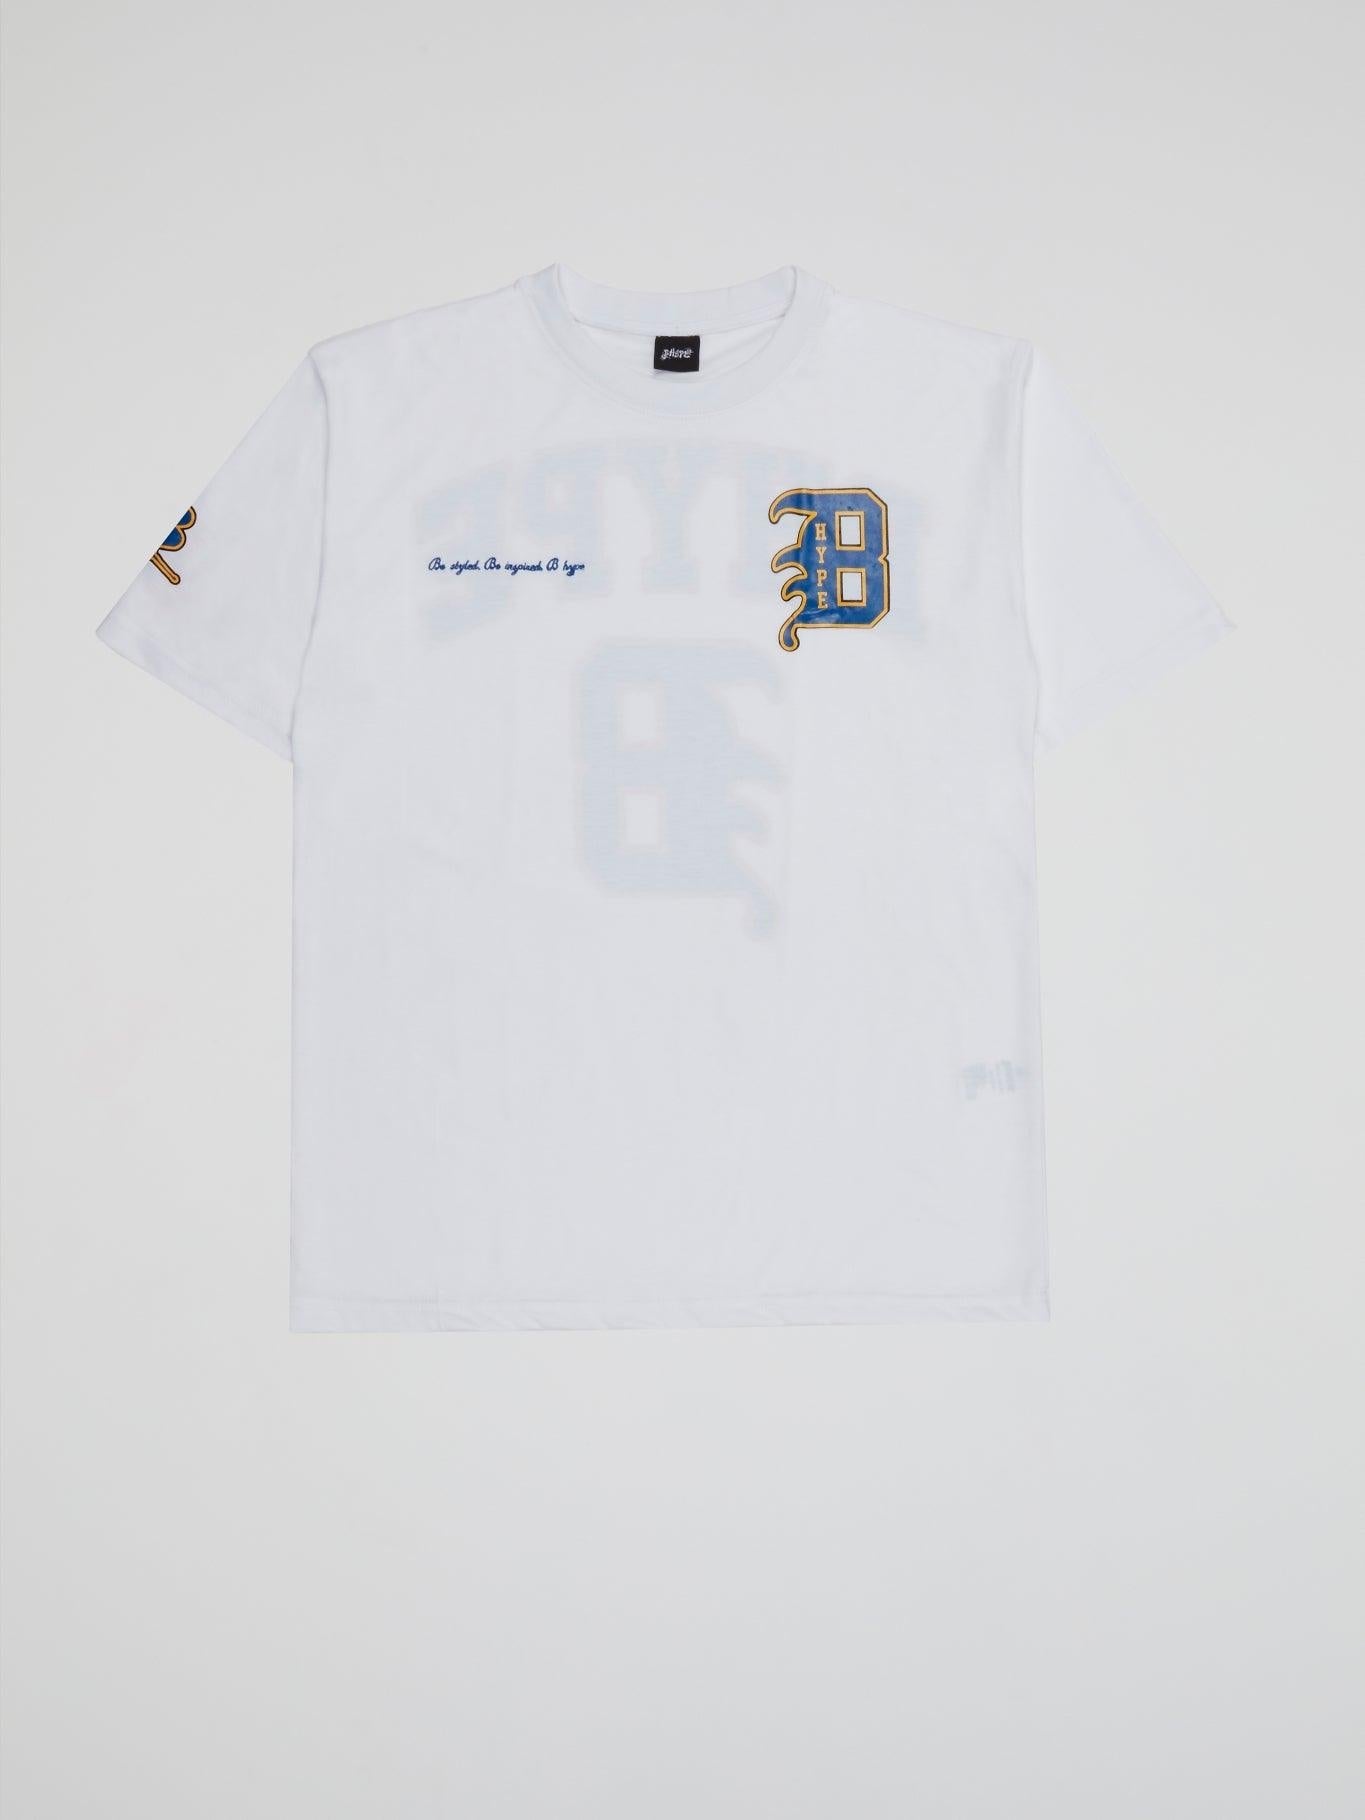 BHYPE WHITE T-SHIRT VARSITY COLLECTION - B-Hype Society